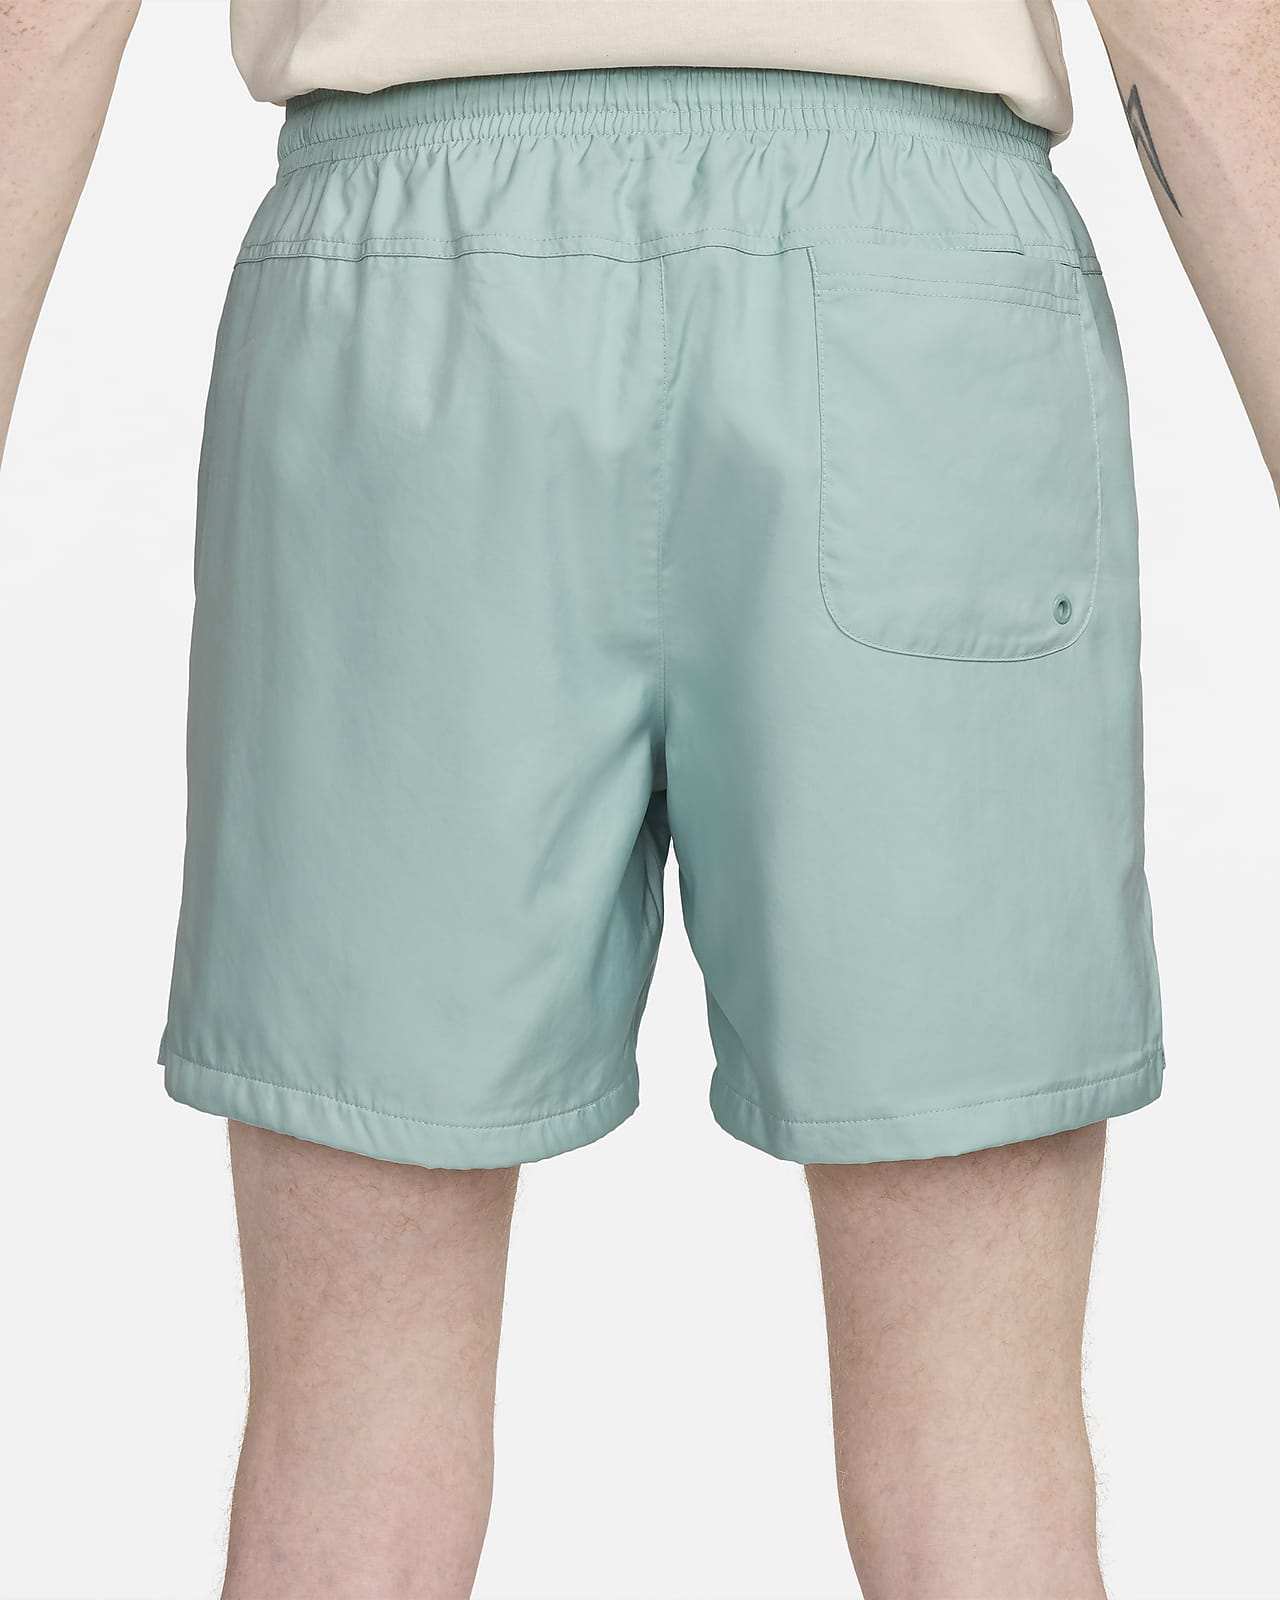 Nike Sportswear Sport Essentials Woven Lined Flow Shorts Mens, Light  Marine/White, 3X-Large at  Men's Clothing store